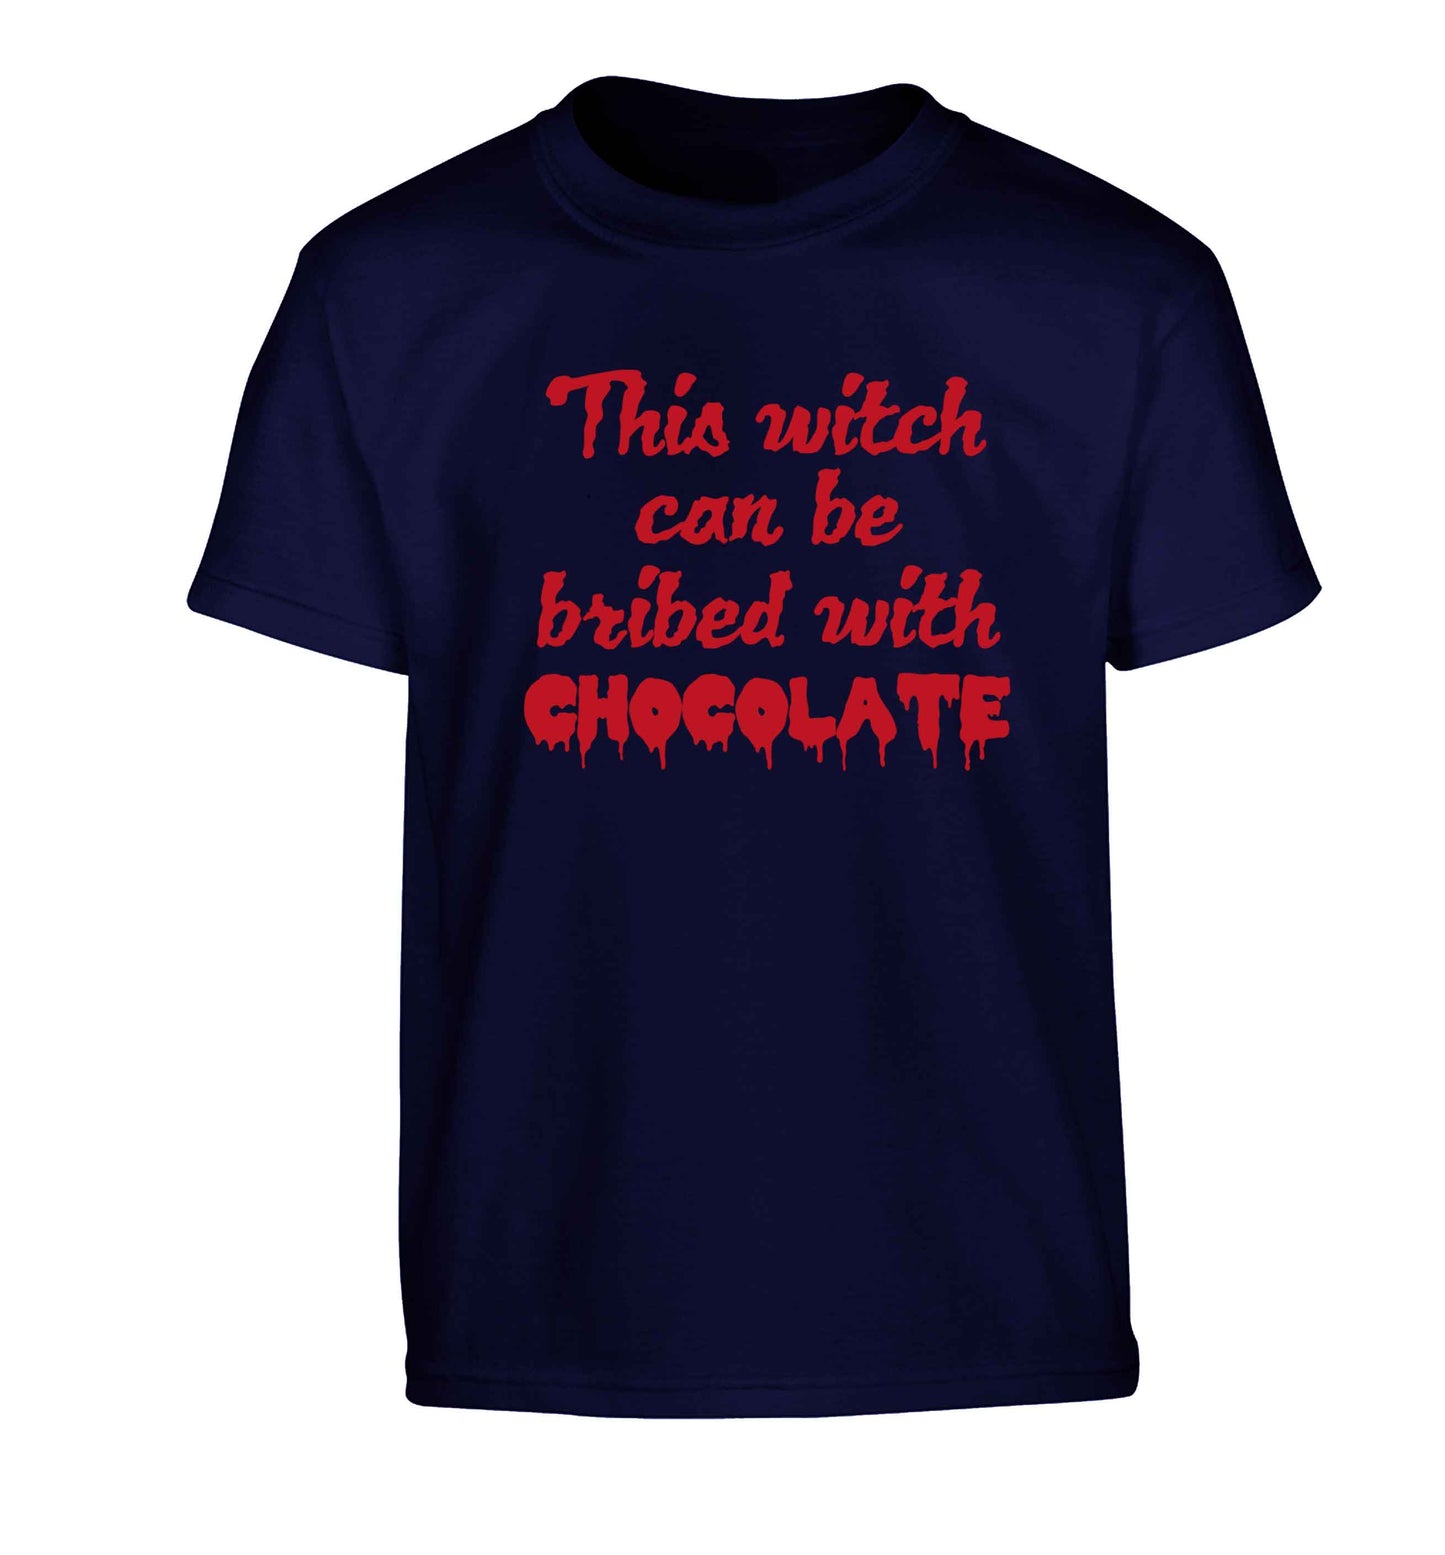 This witch can be bribed with chocolate Children's navy Tshirt 12-13 Years